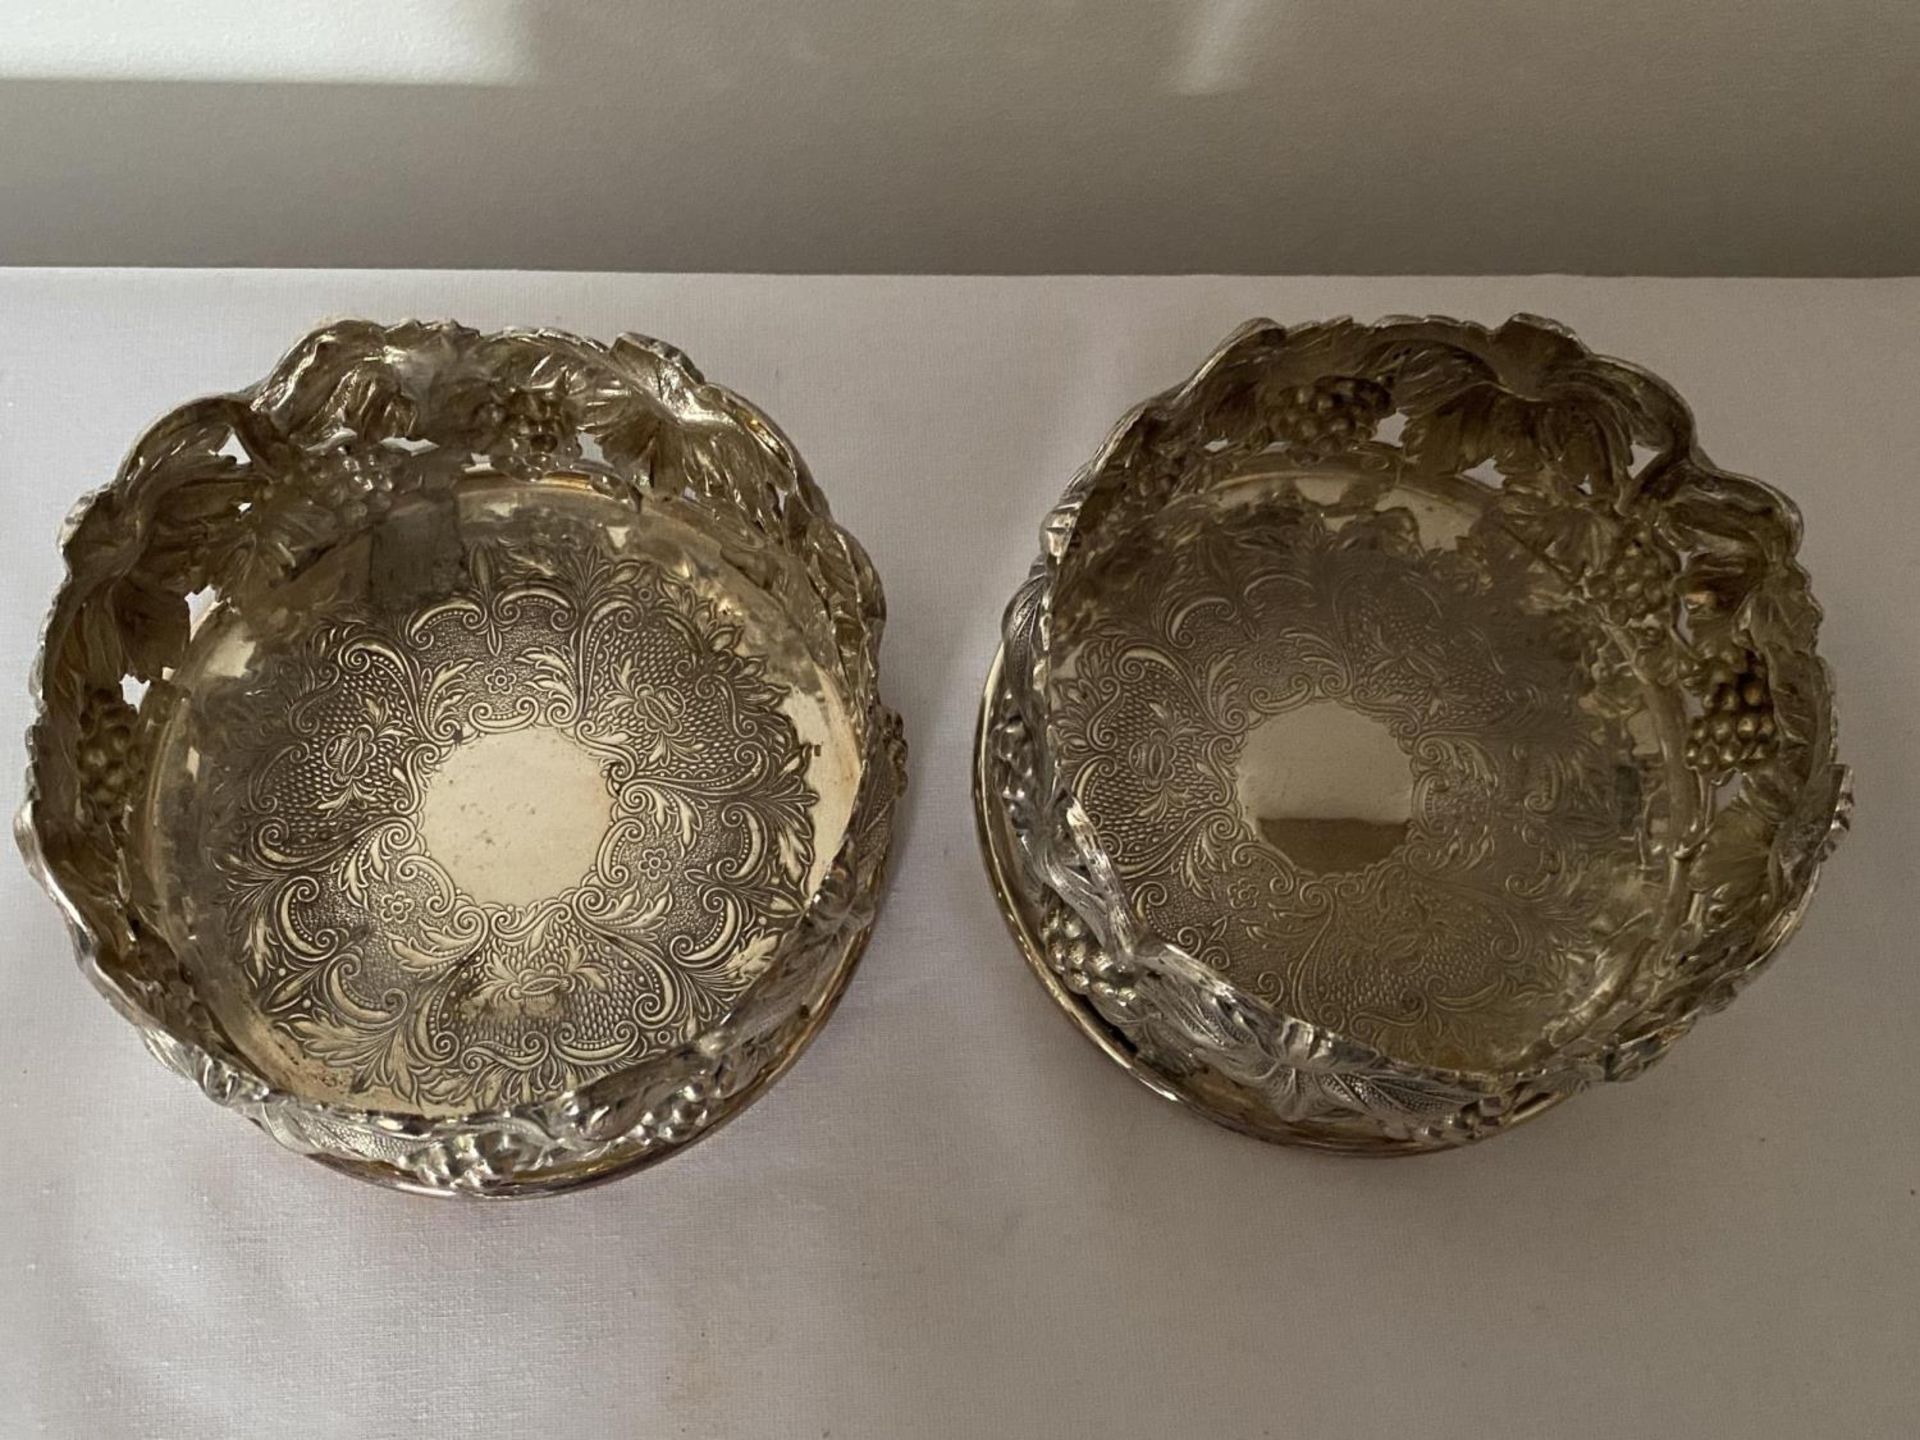 A PAIR OF PORTUGUESE TOPAZIO CASQUINHA ORNATE SILVER PLATED WINE COASTERS, T CROWN MARK AND DATE - Image 3 of 7